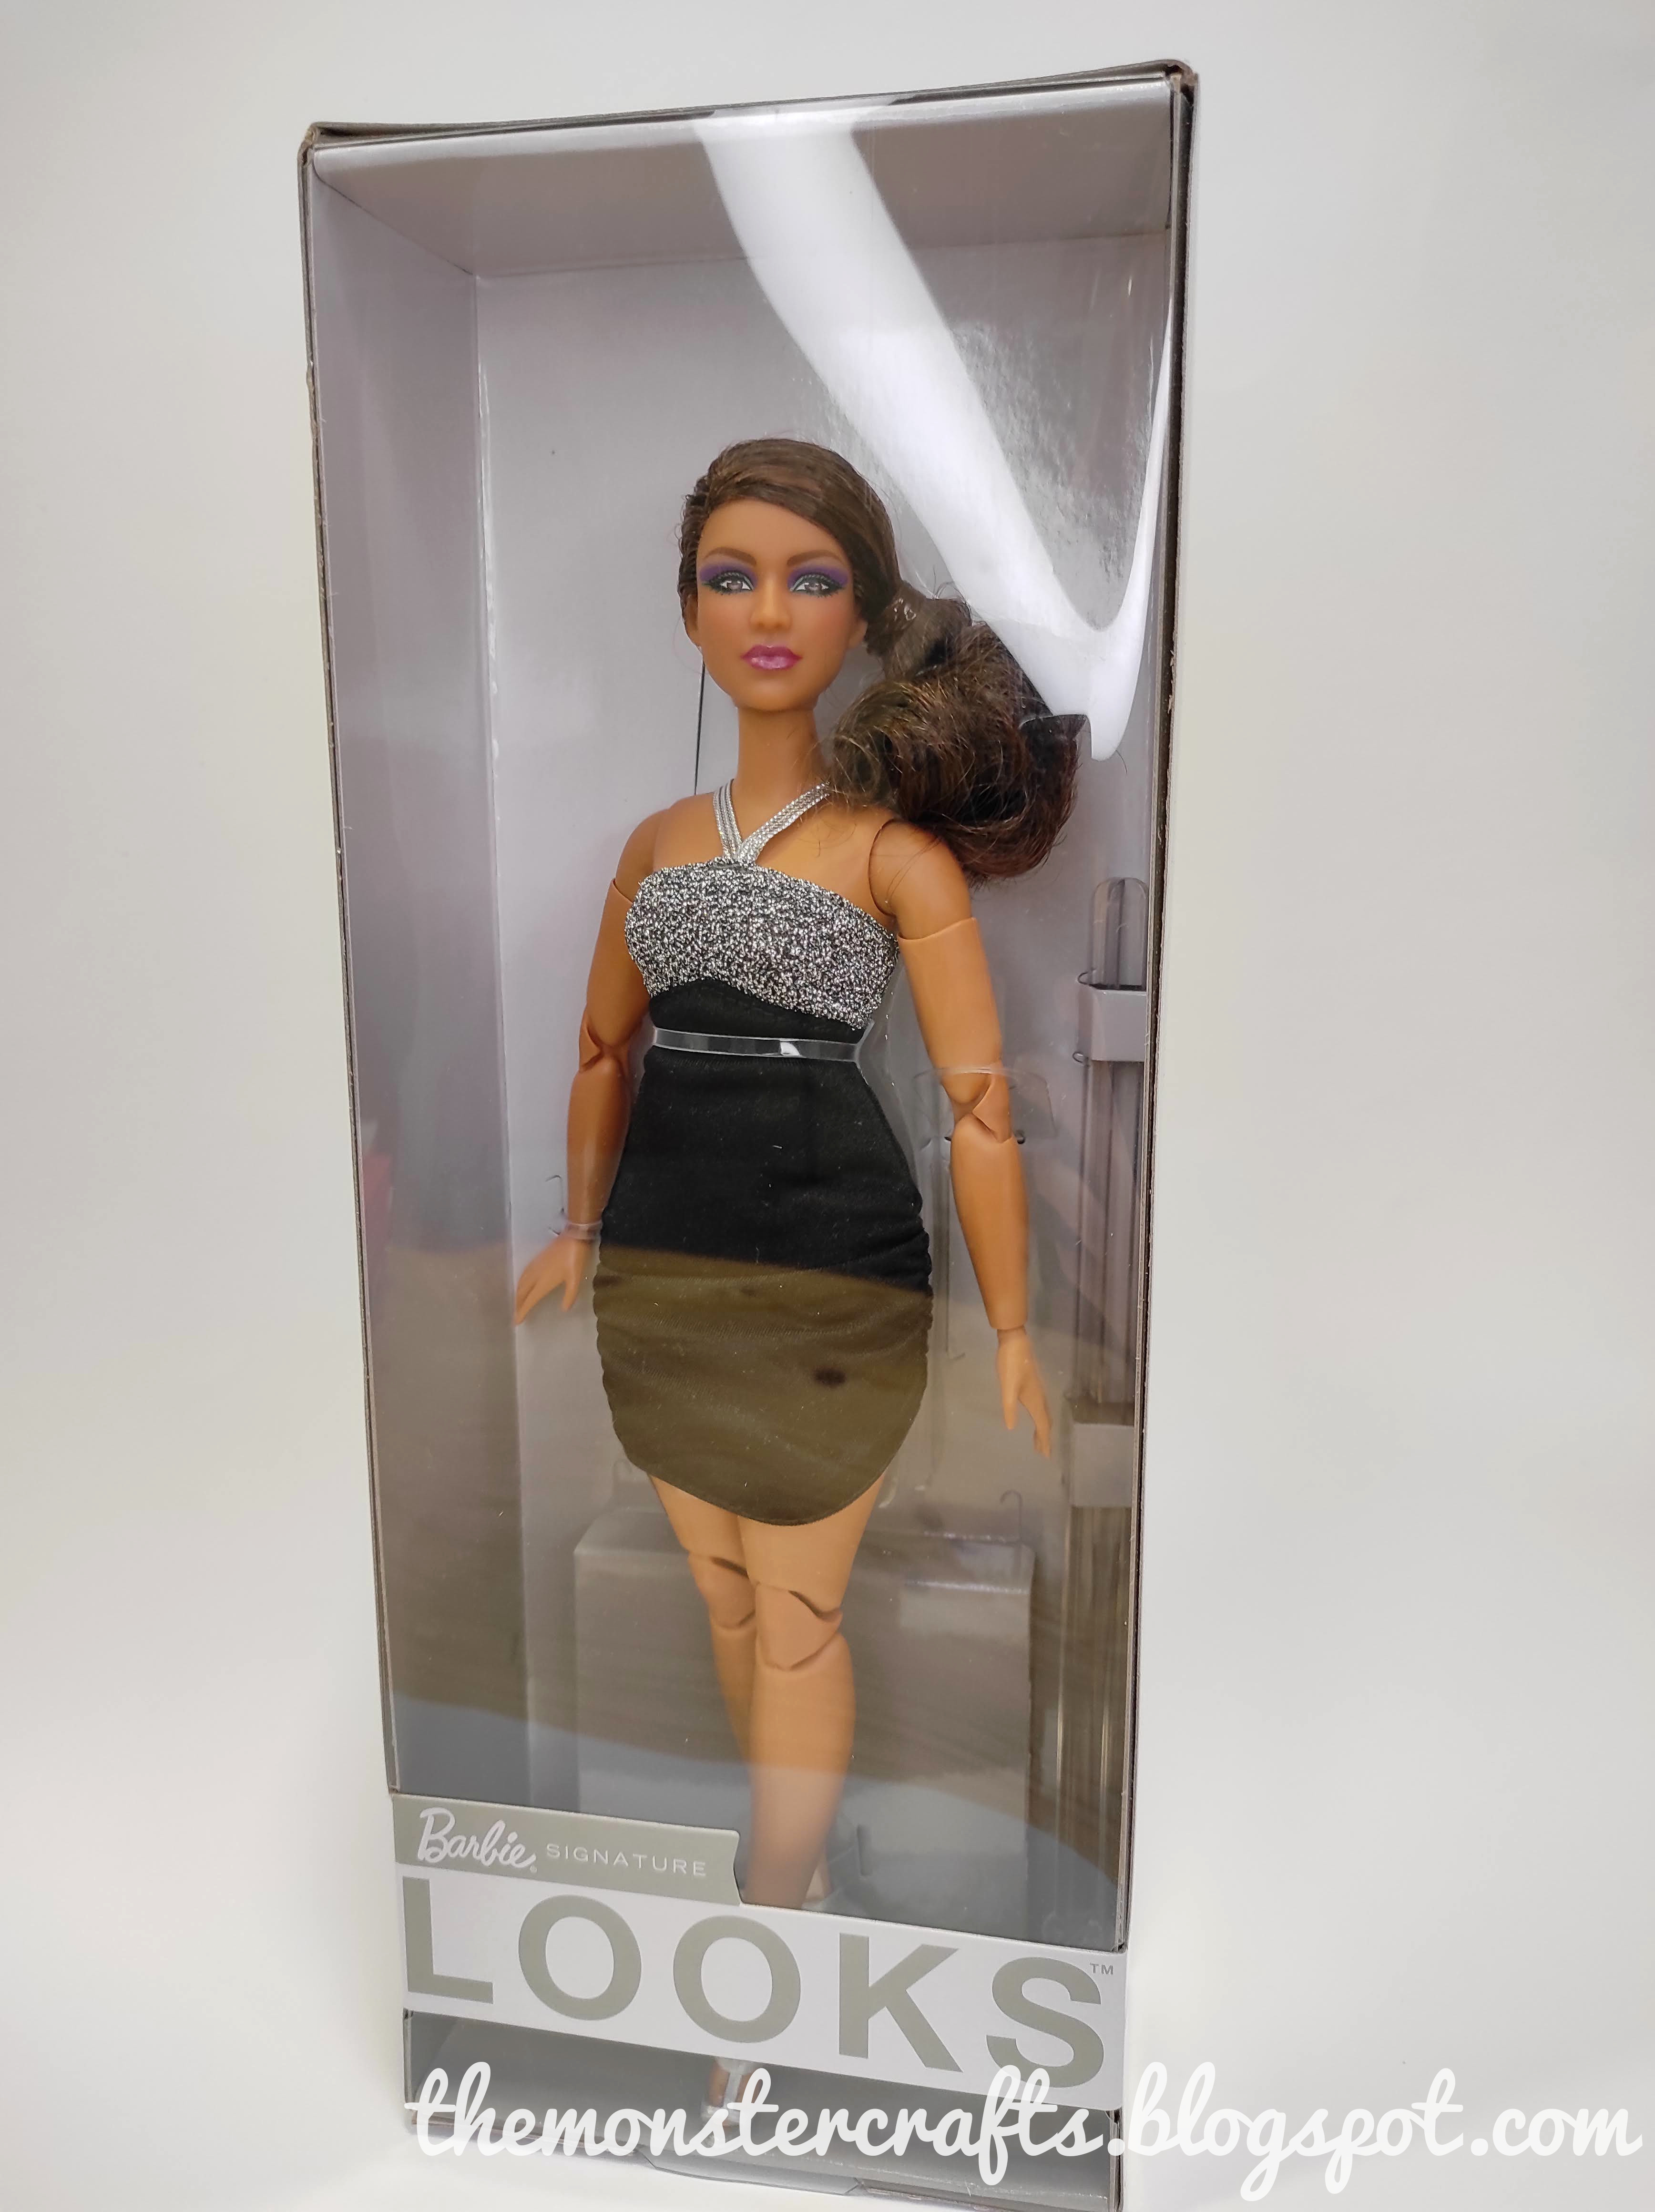 Curvy Barbie wardrobe find - details in comments : r/Barbie